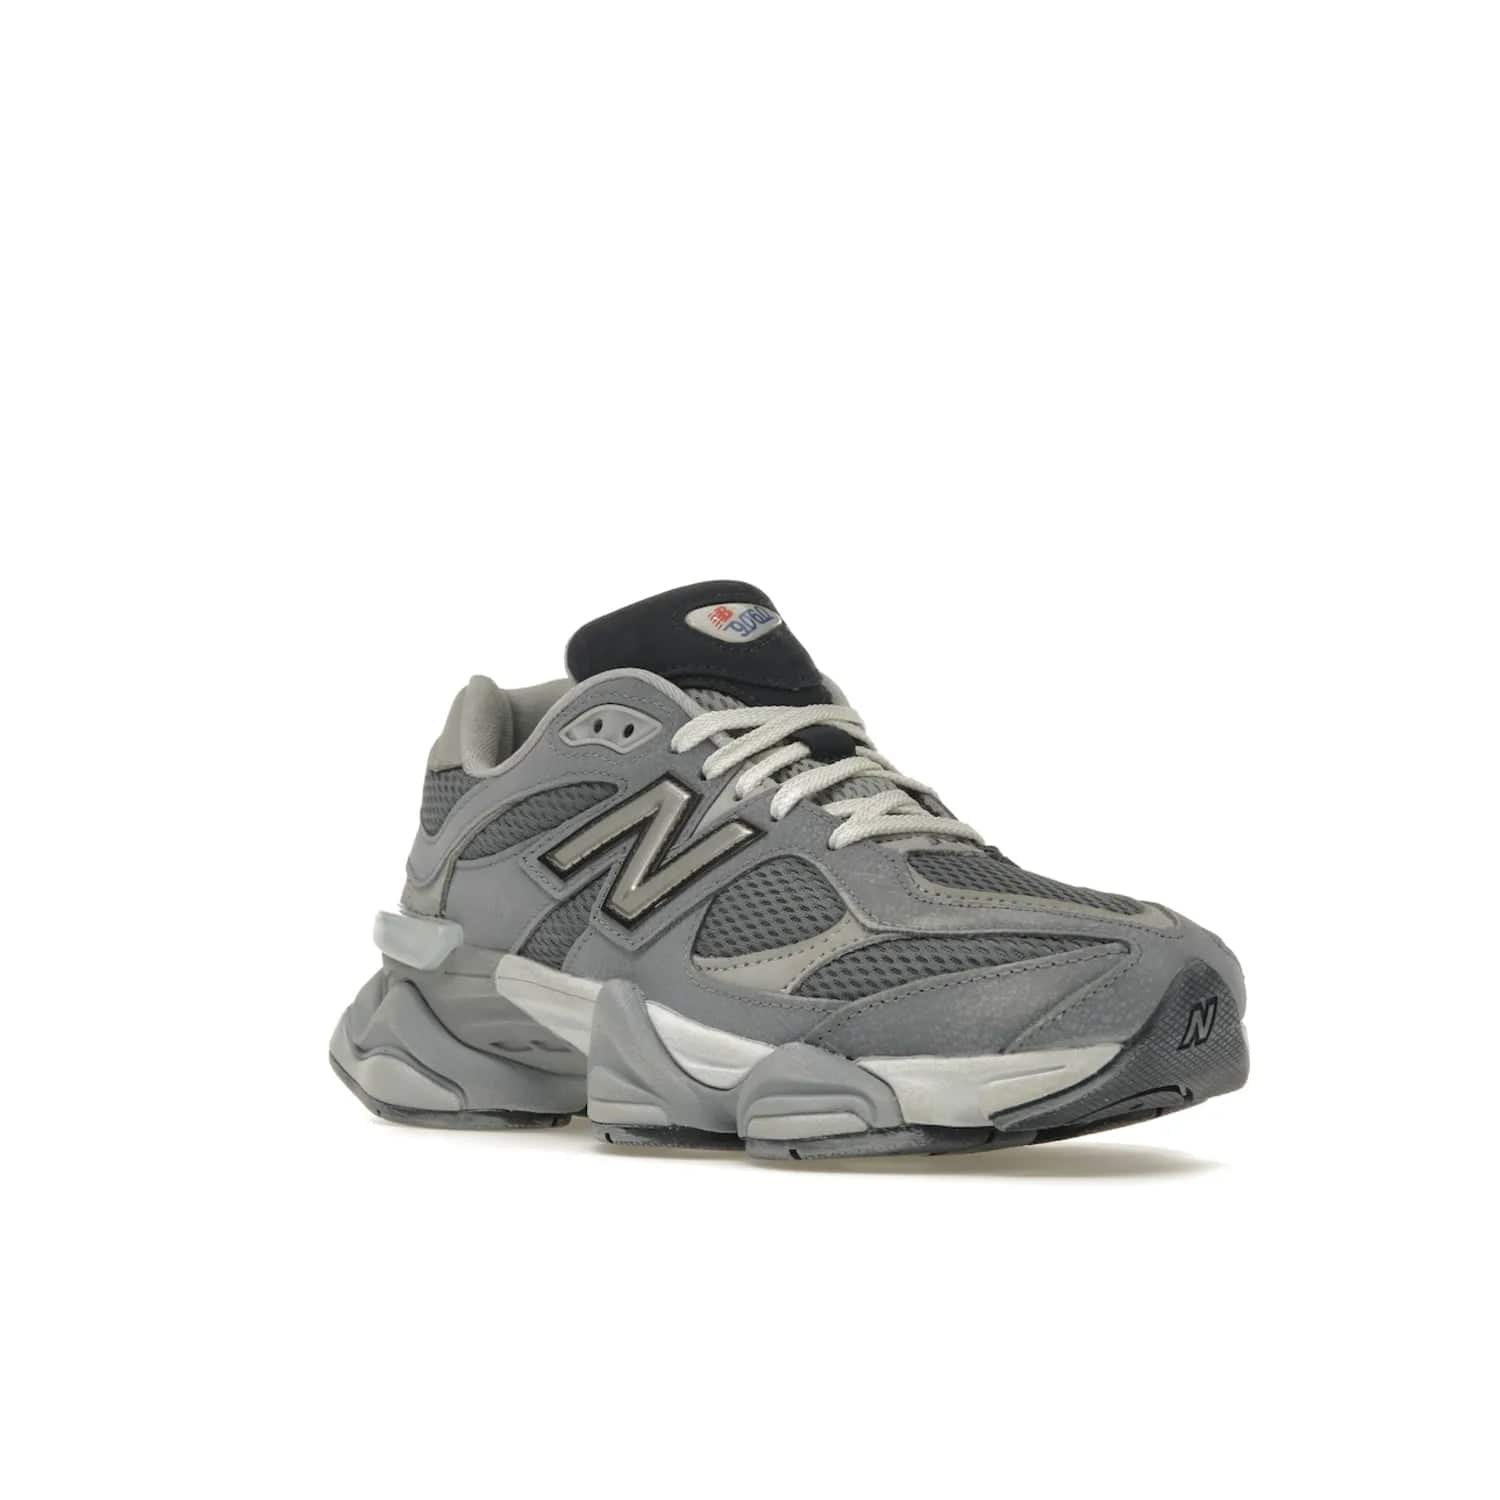 New Balance 9060 Grey Day (2023) - Image 6 - Only at www.BallersClubKickz.com - #
Sporty-meets-stylish in the New Balance 9060 Grey Day sneaker. Designed with Arctic Grey, Steel, and Silver Metallic, it offers an edgy but wearable look along with classic NB comfort and quality.